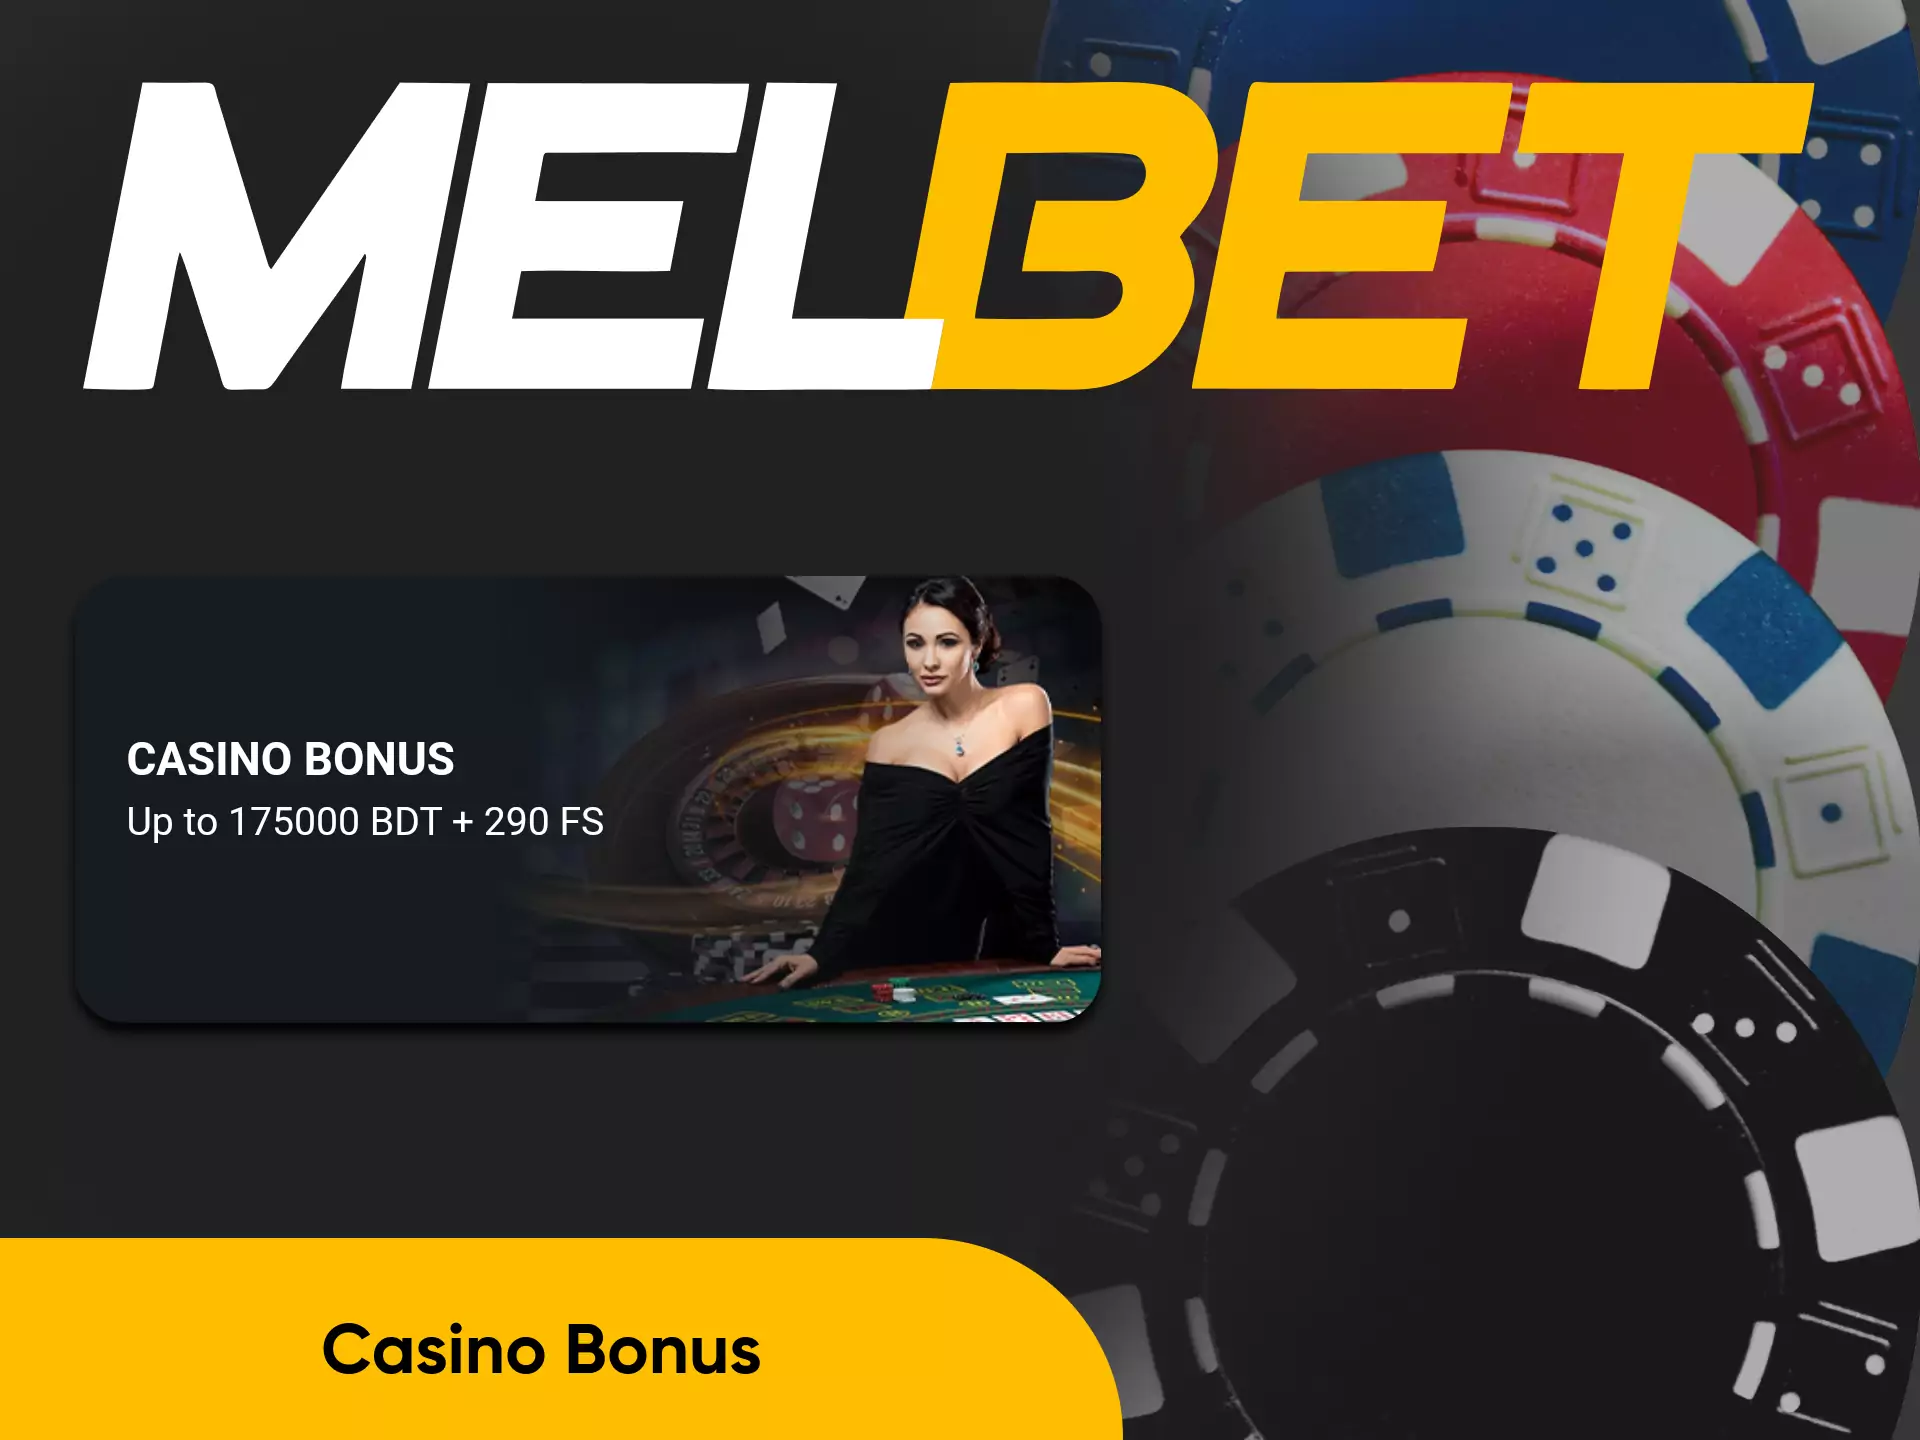 Casino fans can claim a special bonus in the Melbet app.